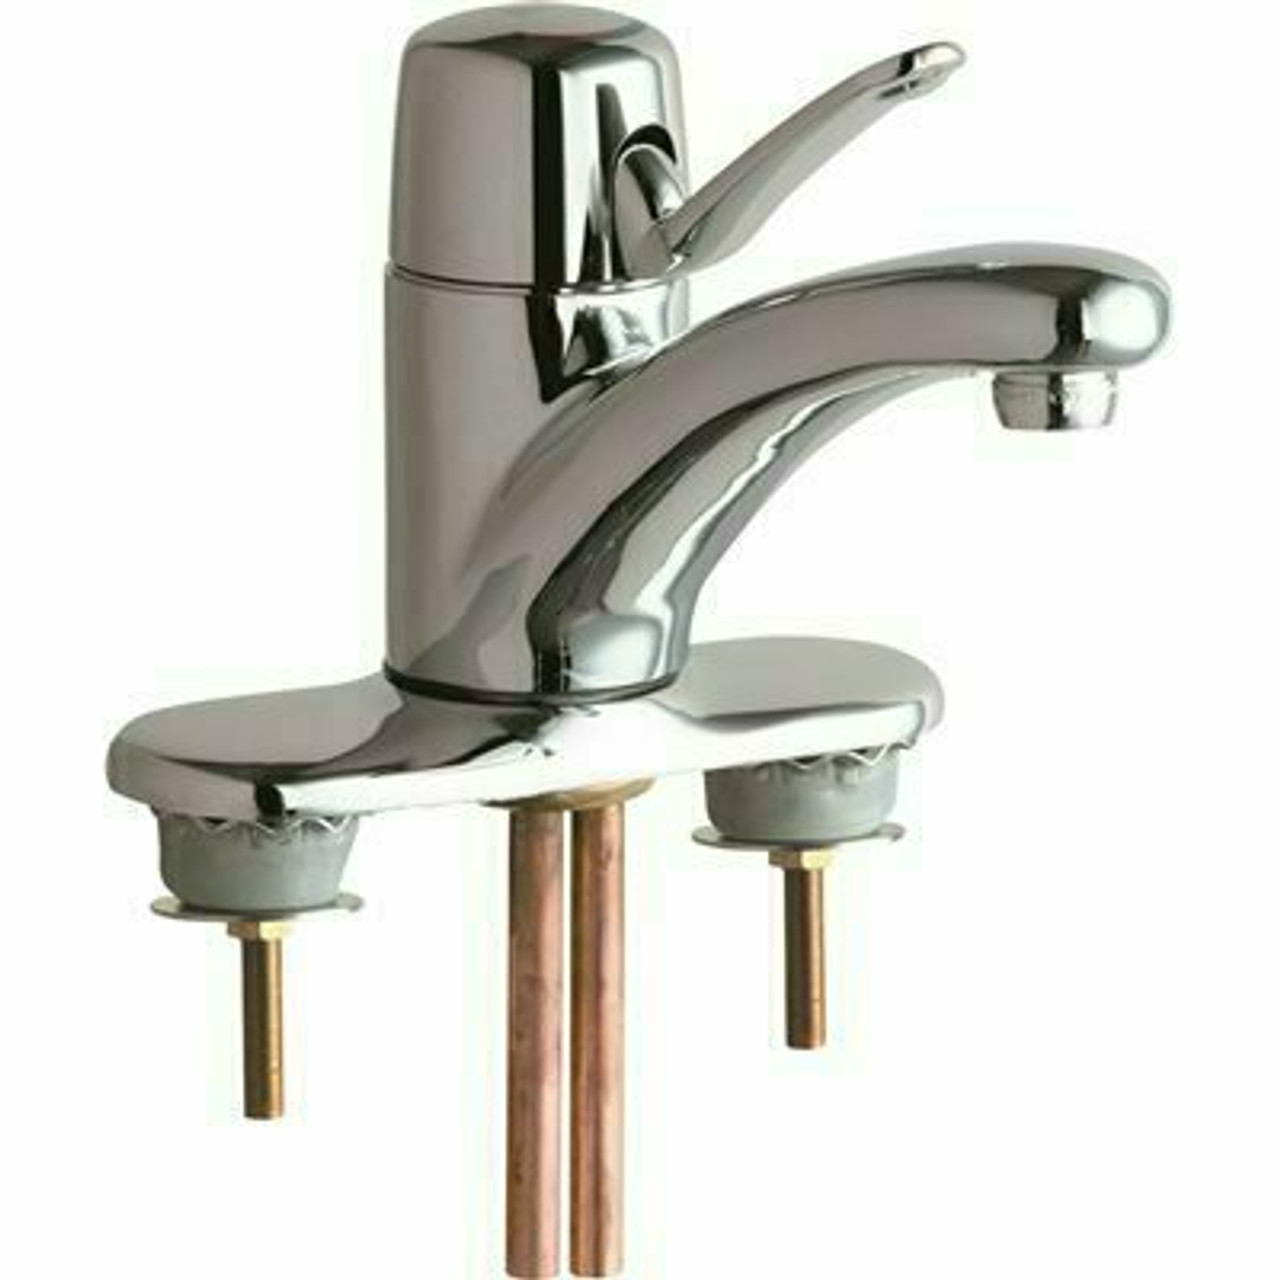 Chicago Faucets Single Lever Bathroom Sink Mixing Faucet With 4 In. Centers, Chrome, Lead Free